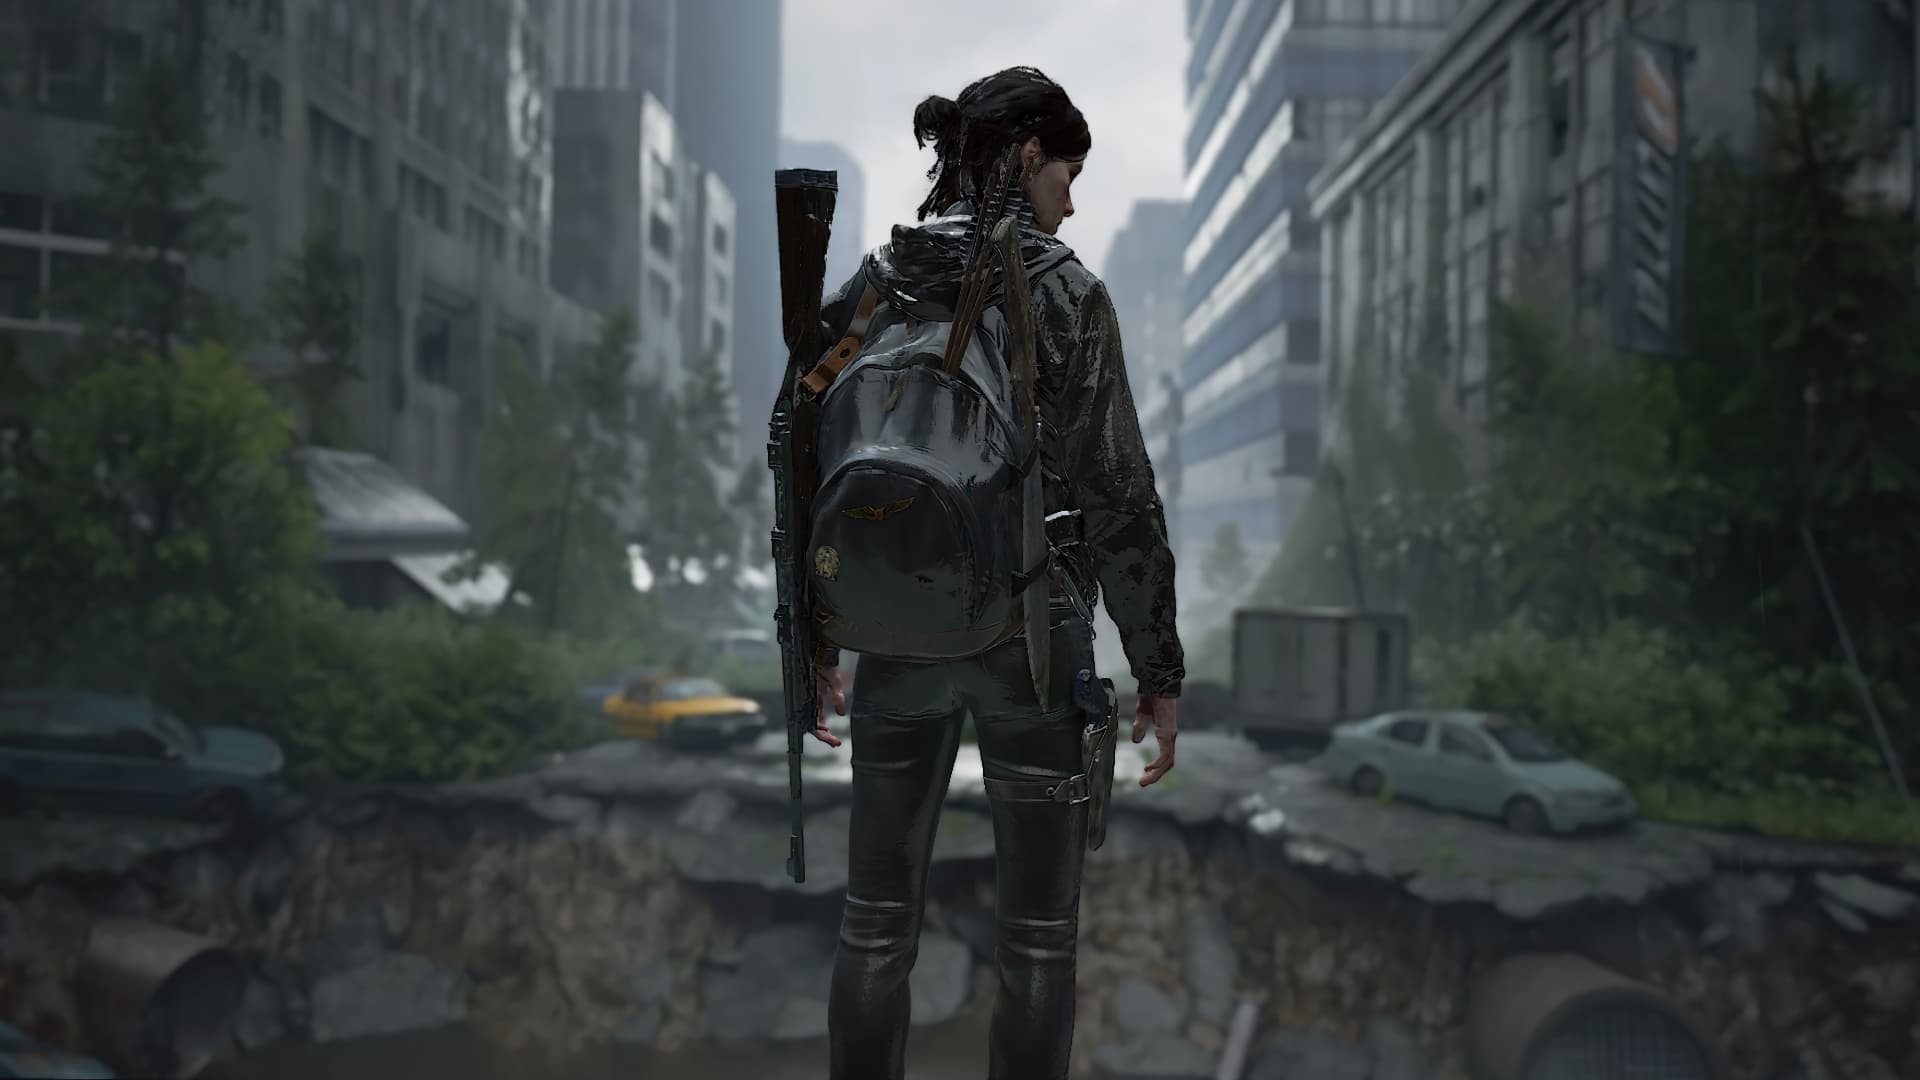 The Last Of Us' Season 2: Predicted Release Date, Cast, Trailer